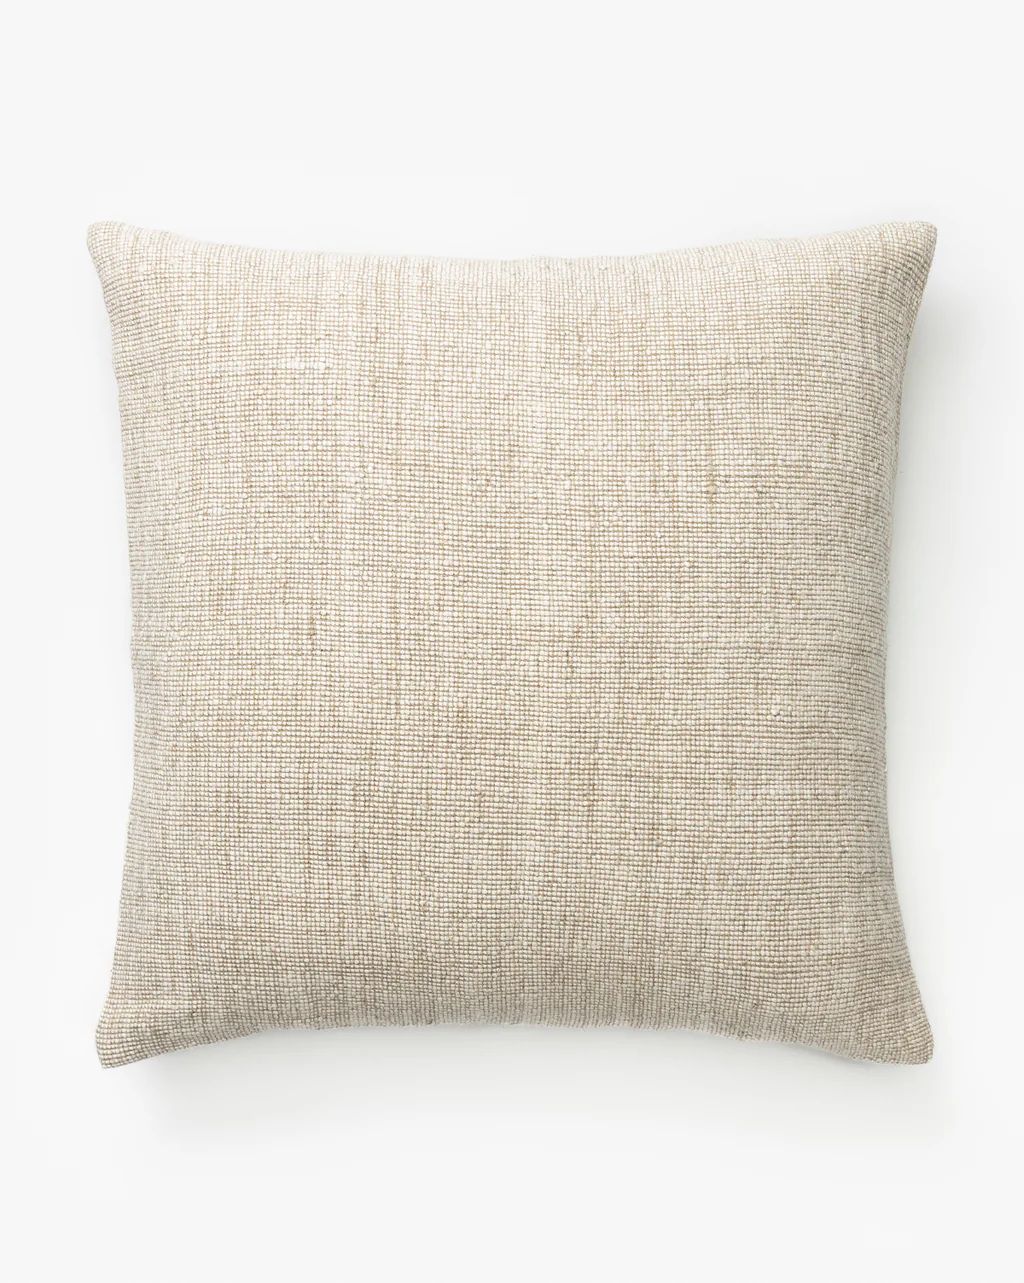 Ivel Pillow Cover | McGee & Co.